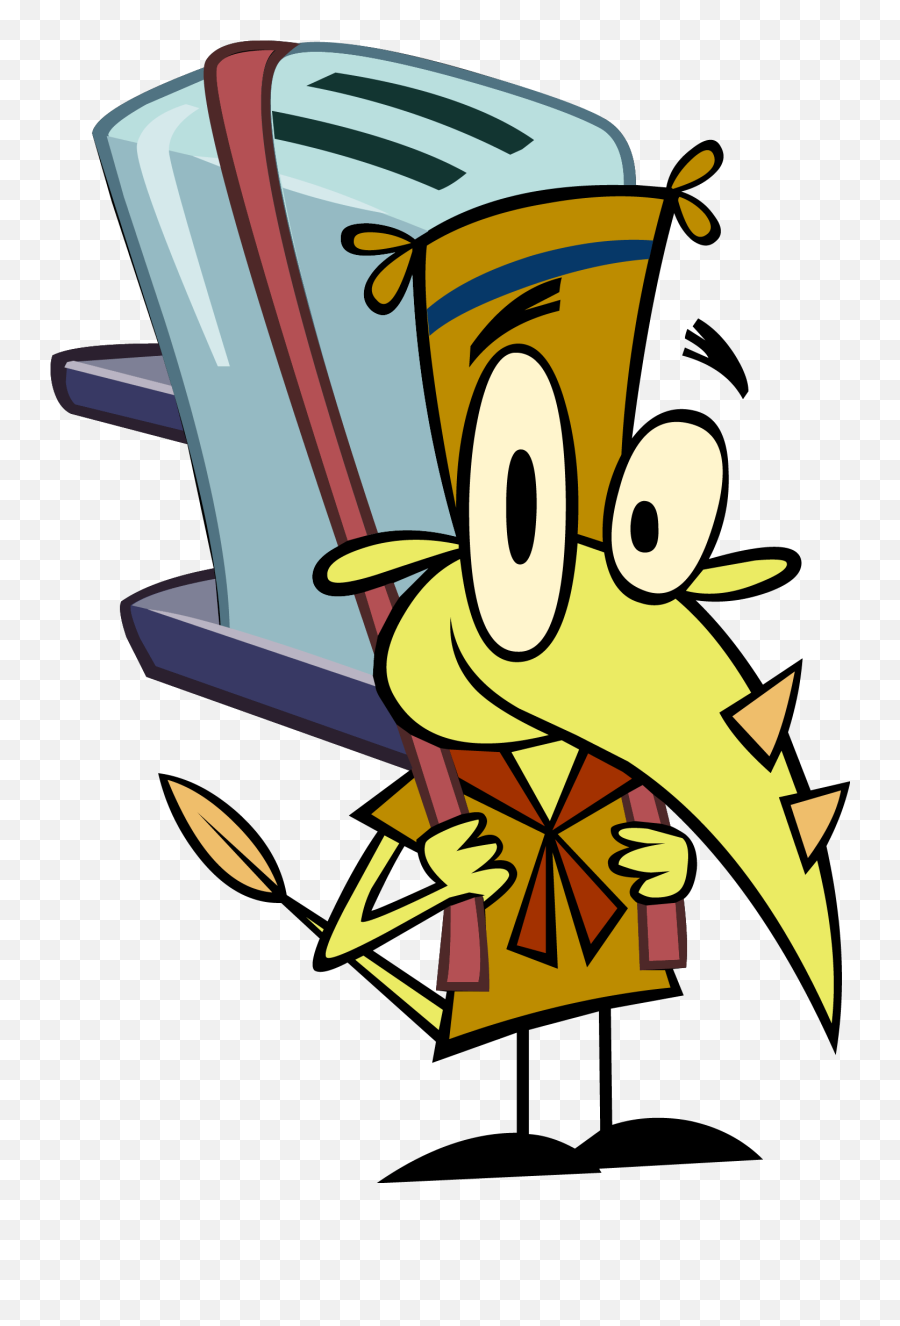 Camp Lazlo Character Clam Transparent - Camp Lazlo Clam Png,Clam Png